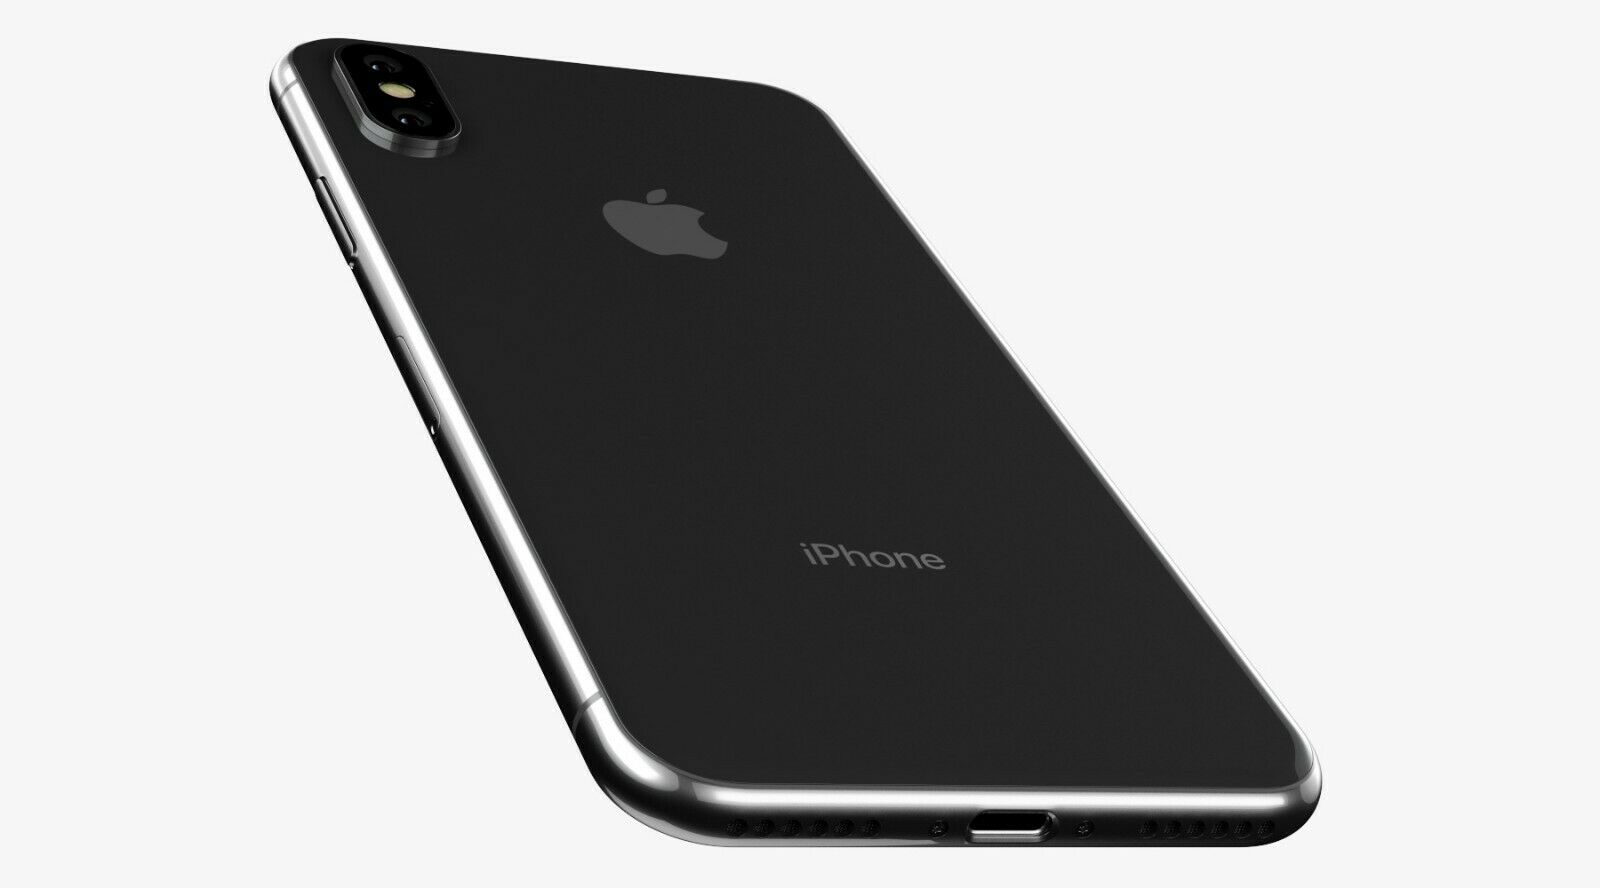 APPLE IPHONE X A1901 64GB UNLOCKED SMARTPHONE-BLK  Refurbished with Charger - Atlas Computers & Electronics 